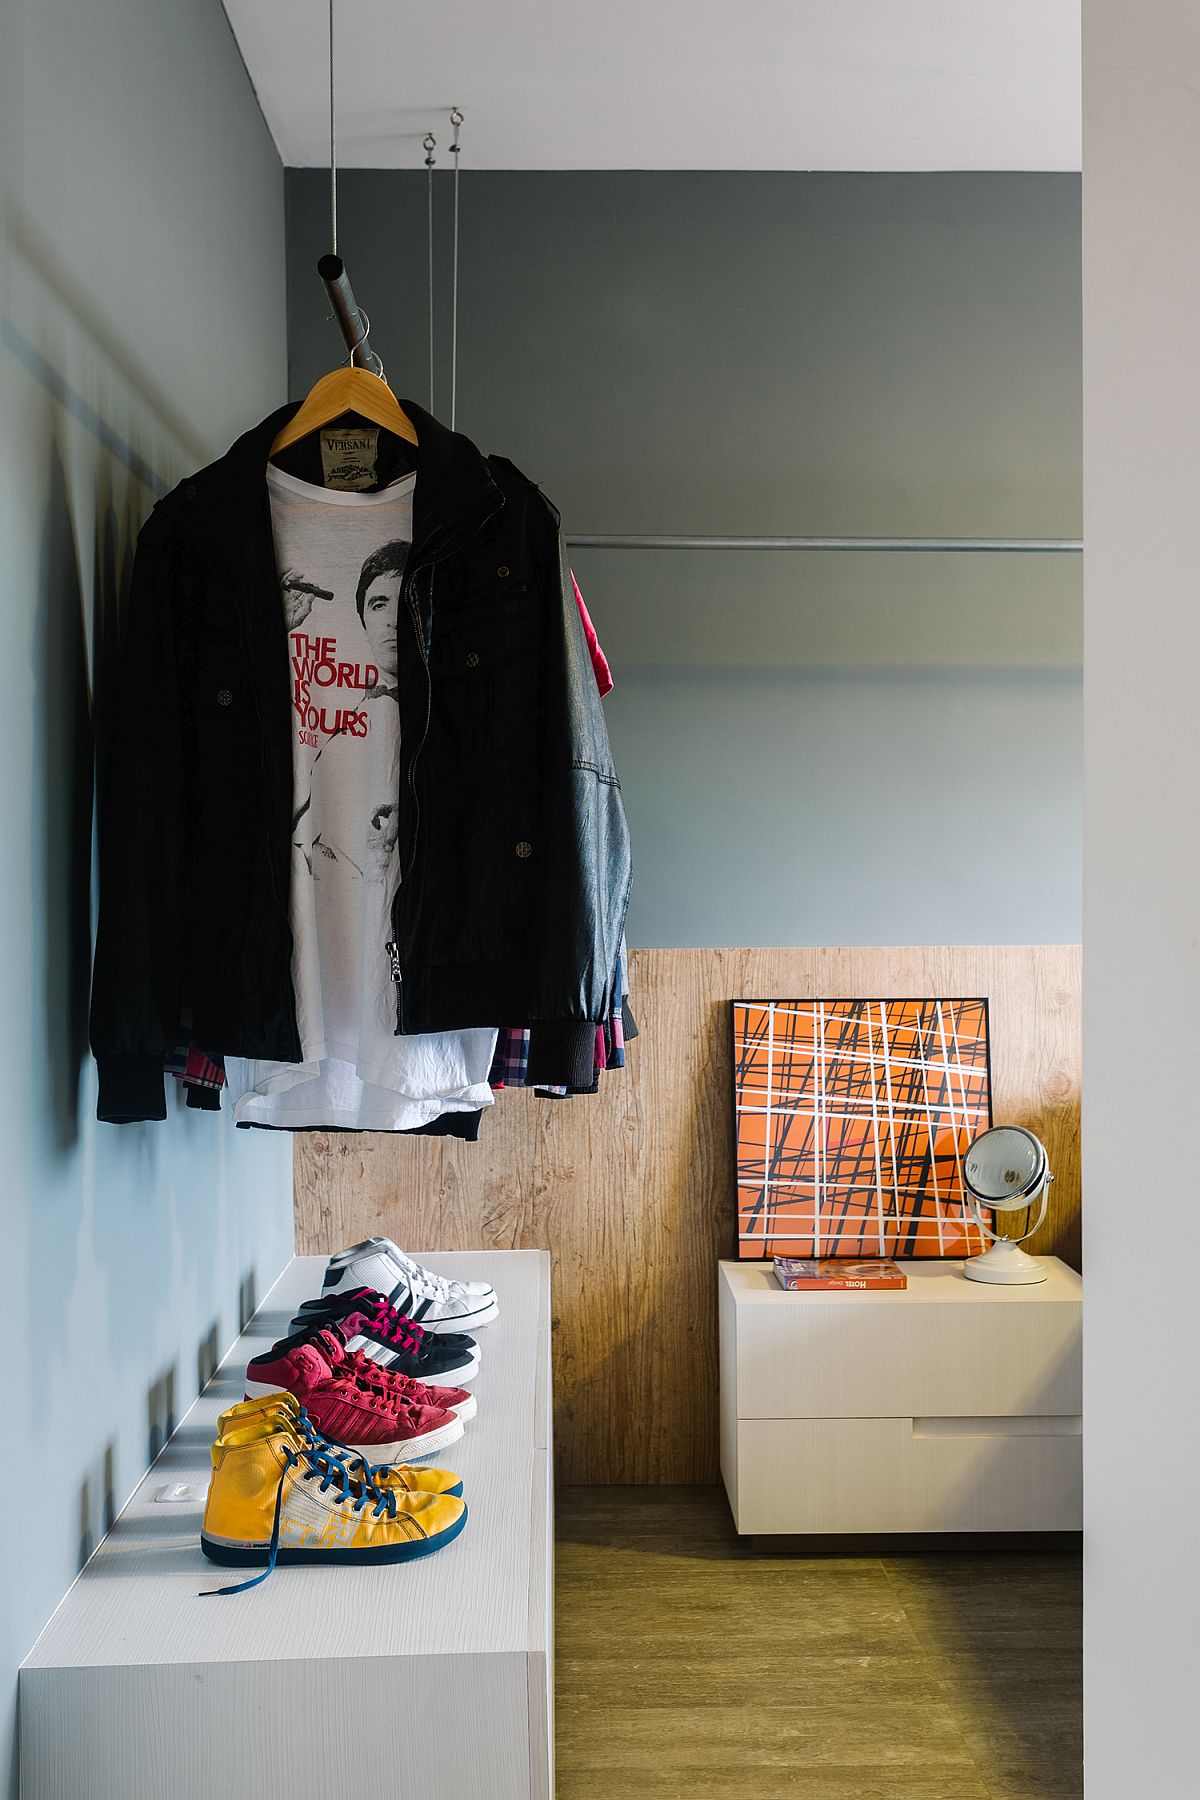 Use the closet rods to create an open wardrobe in the small bedroom